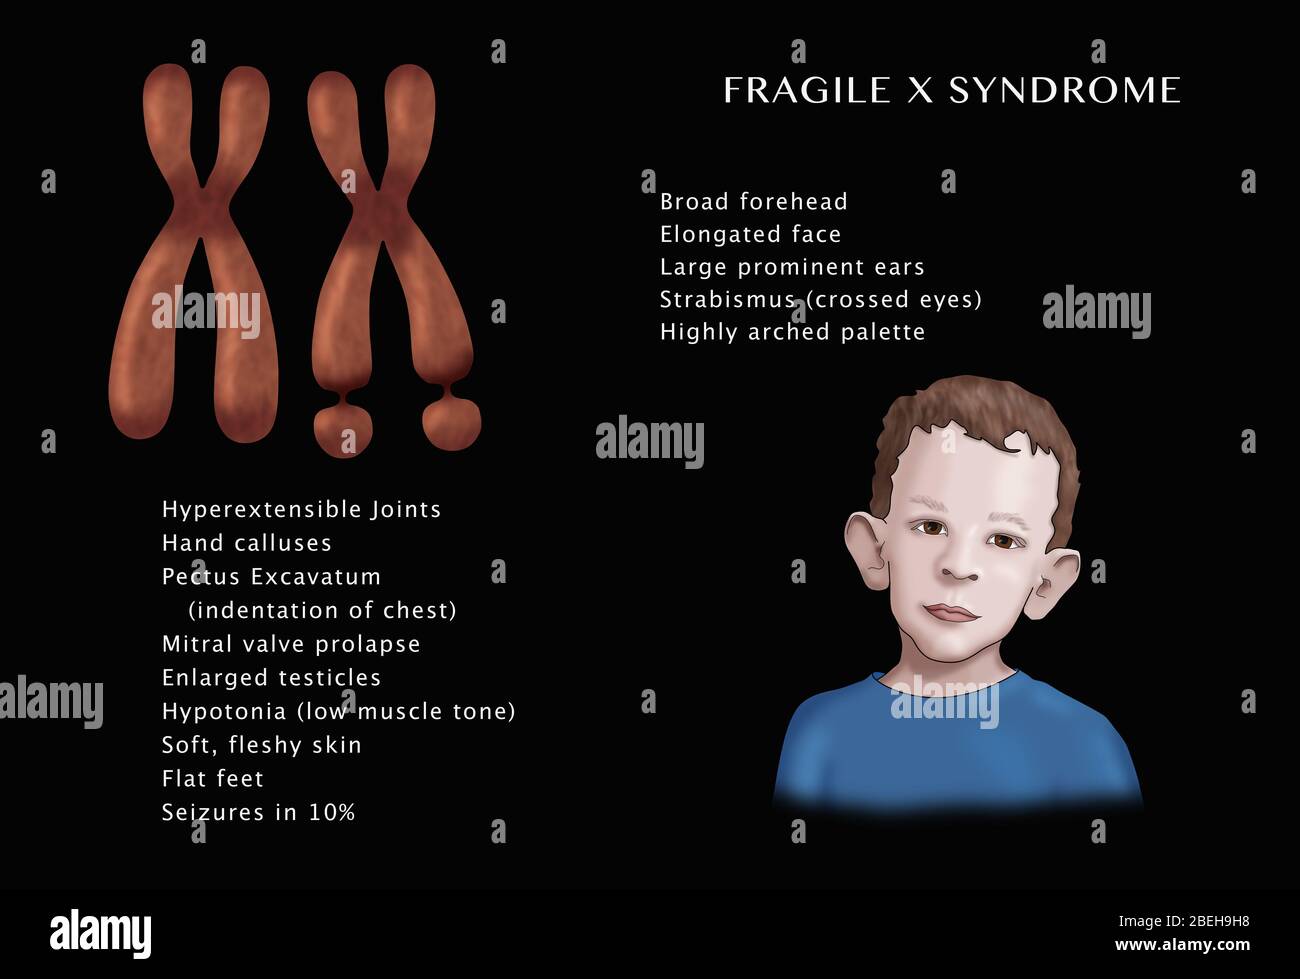 Fragile X Syndrome Testicles